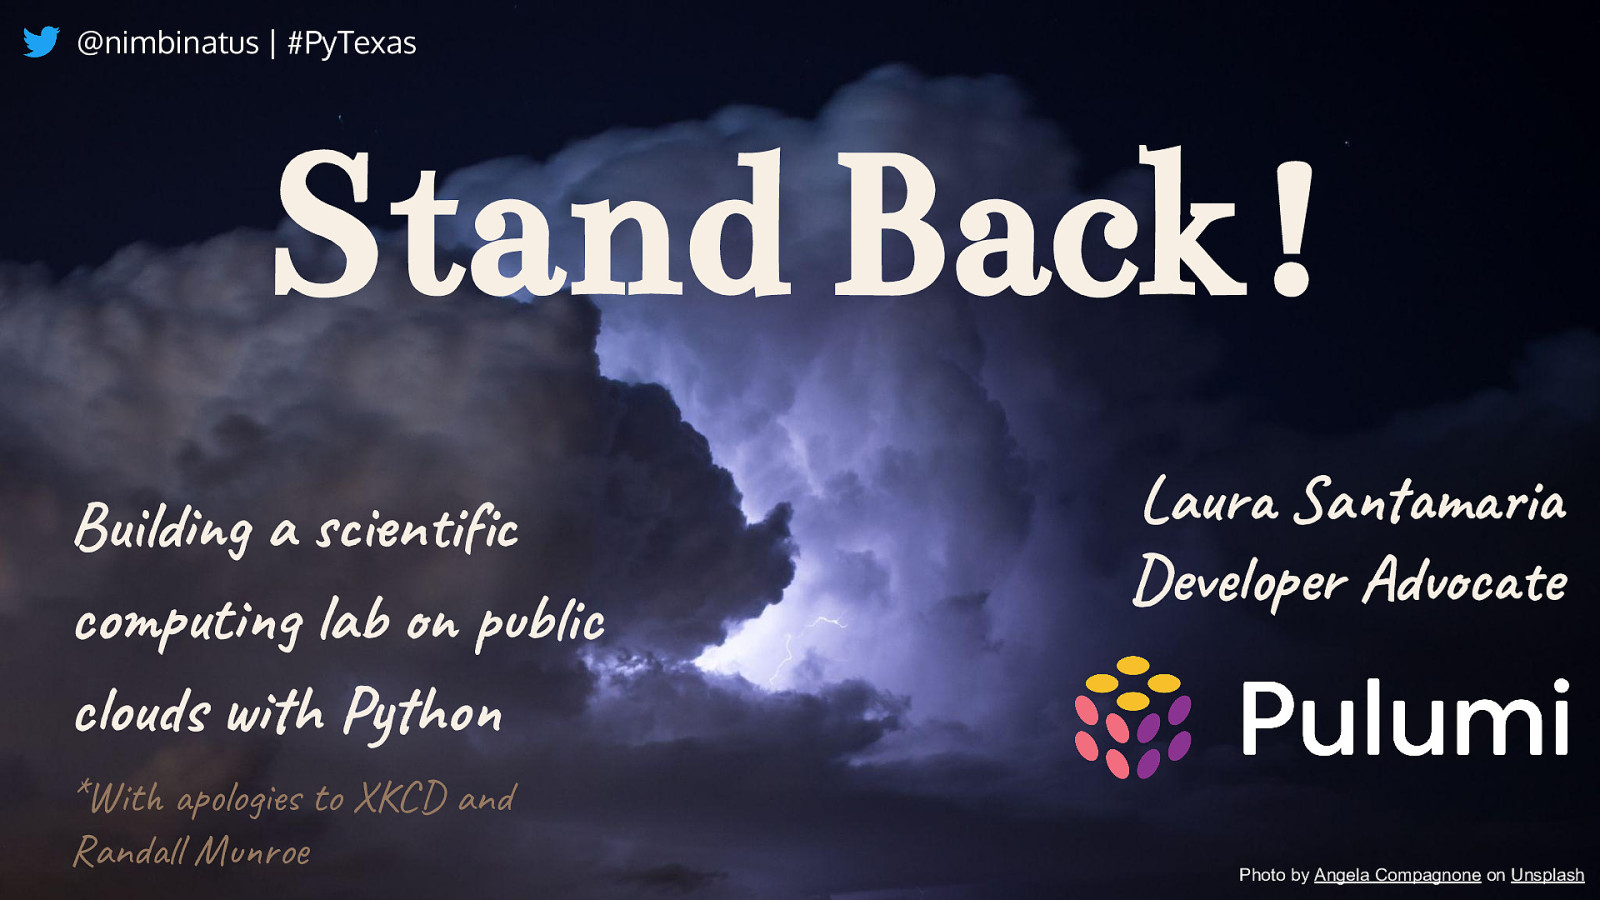 Stand Back!: Building a scientific computing lab on public clouds with Python